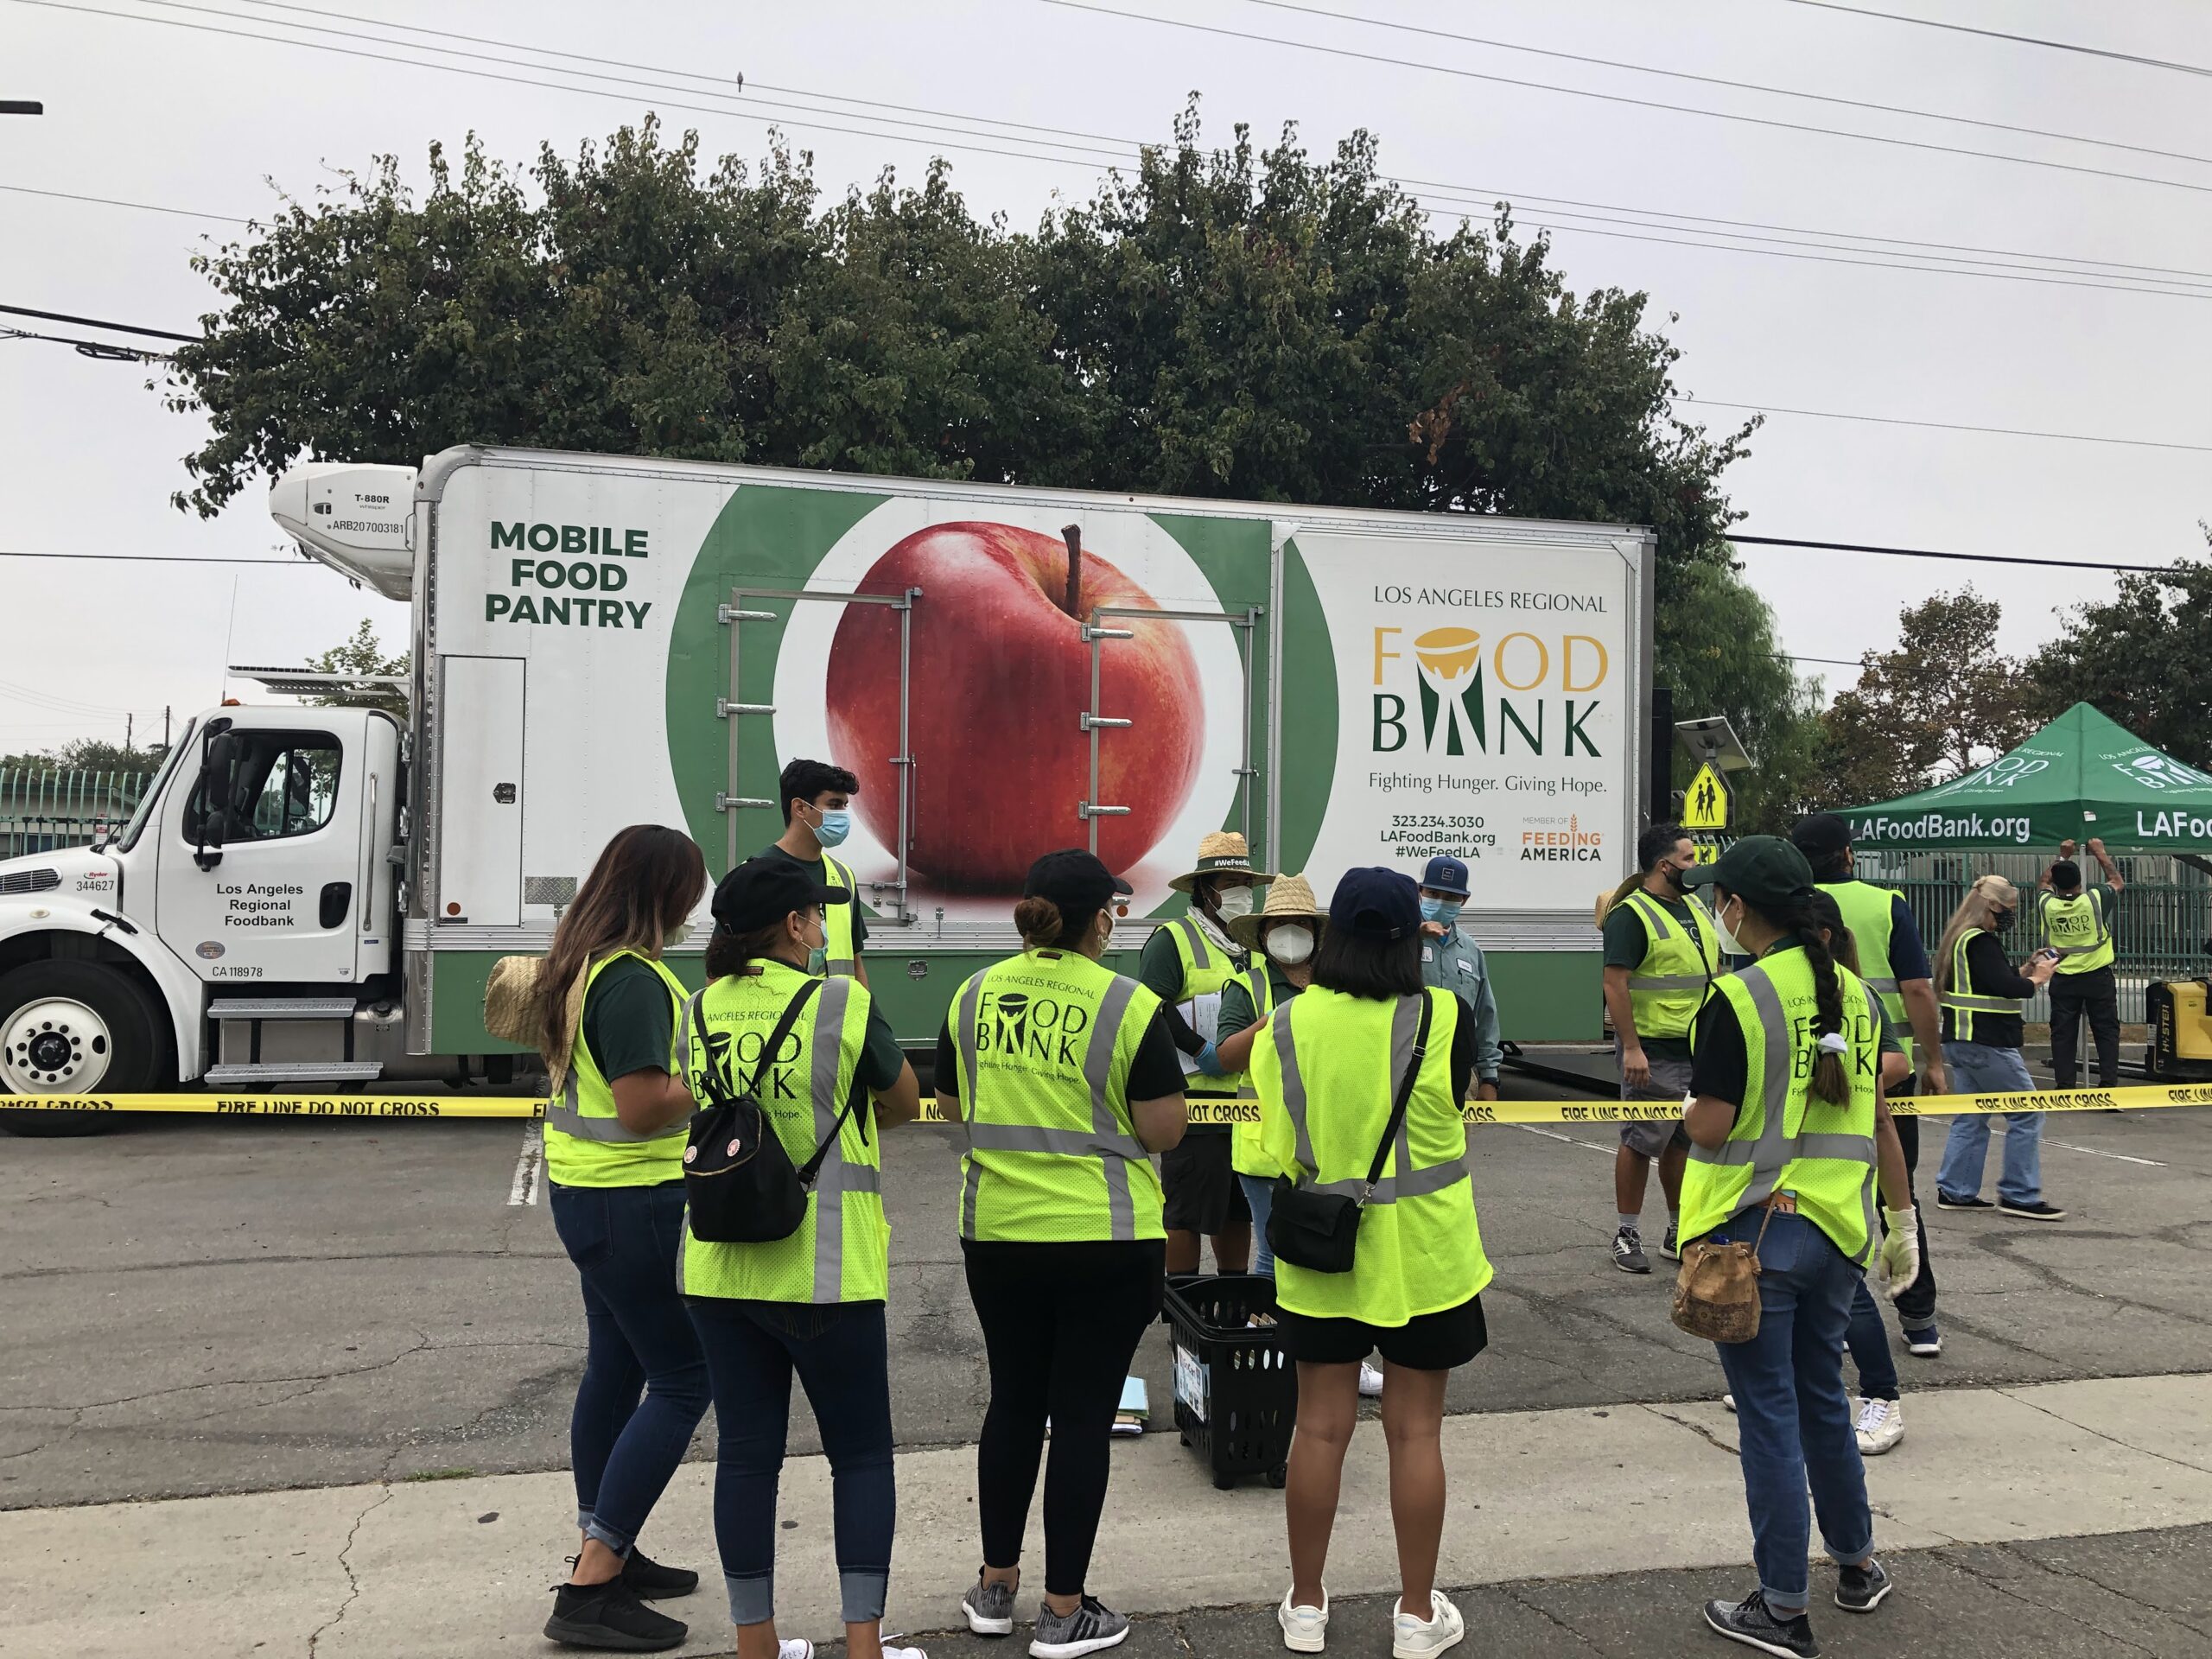 Mobile food pantry welcomes all